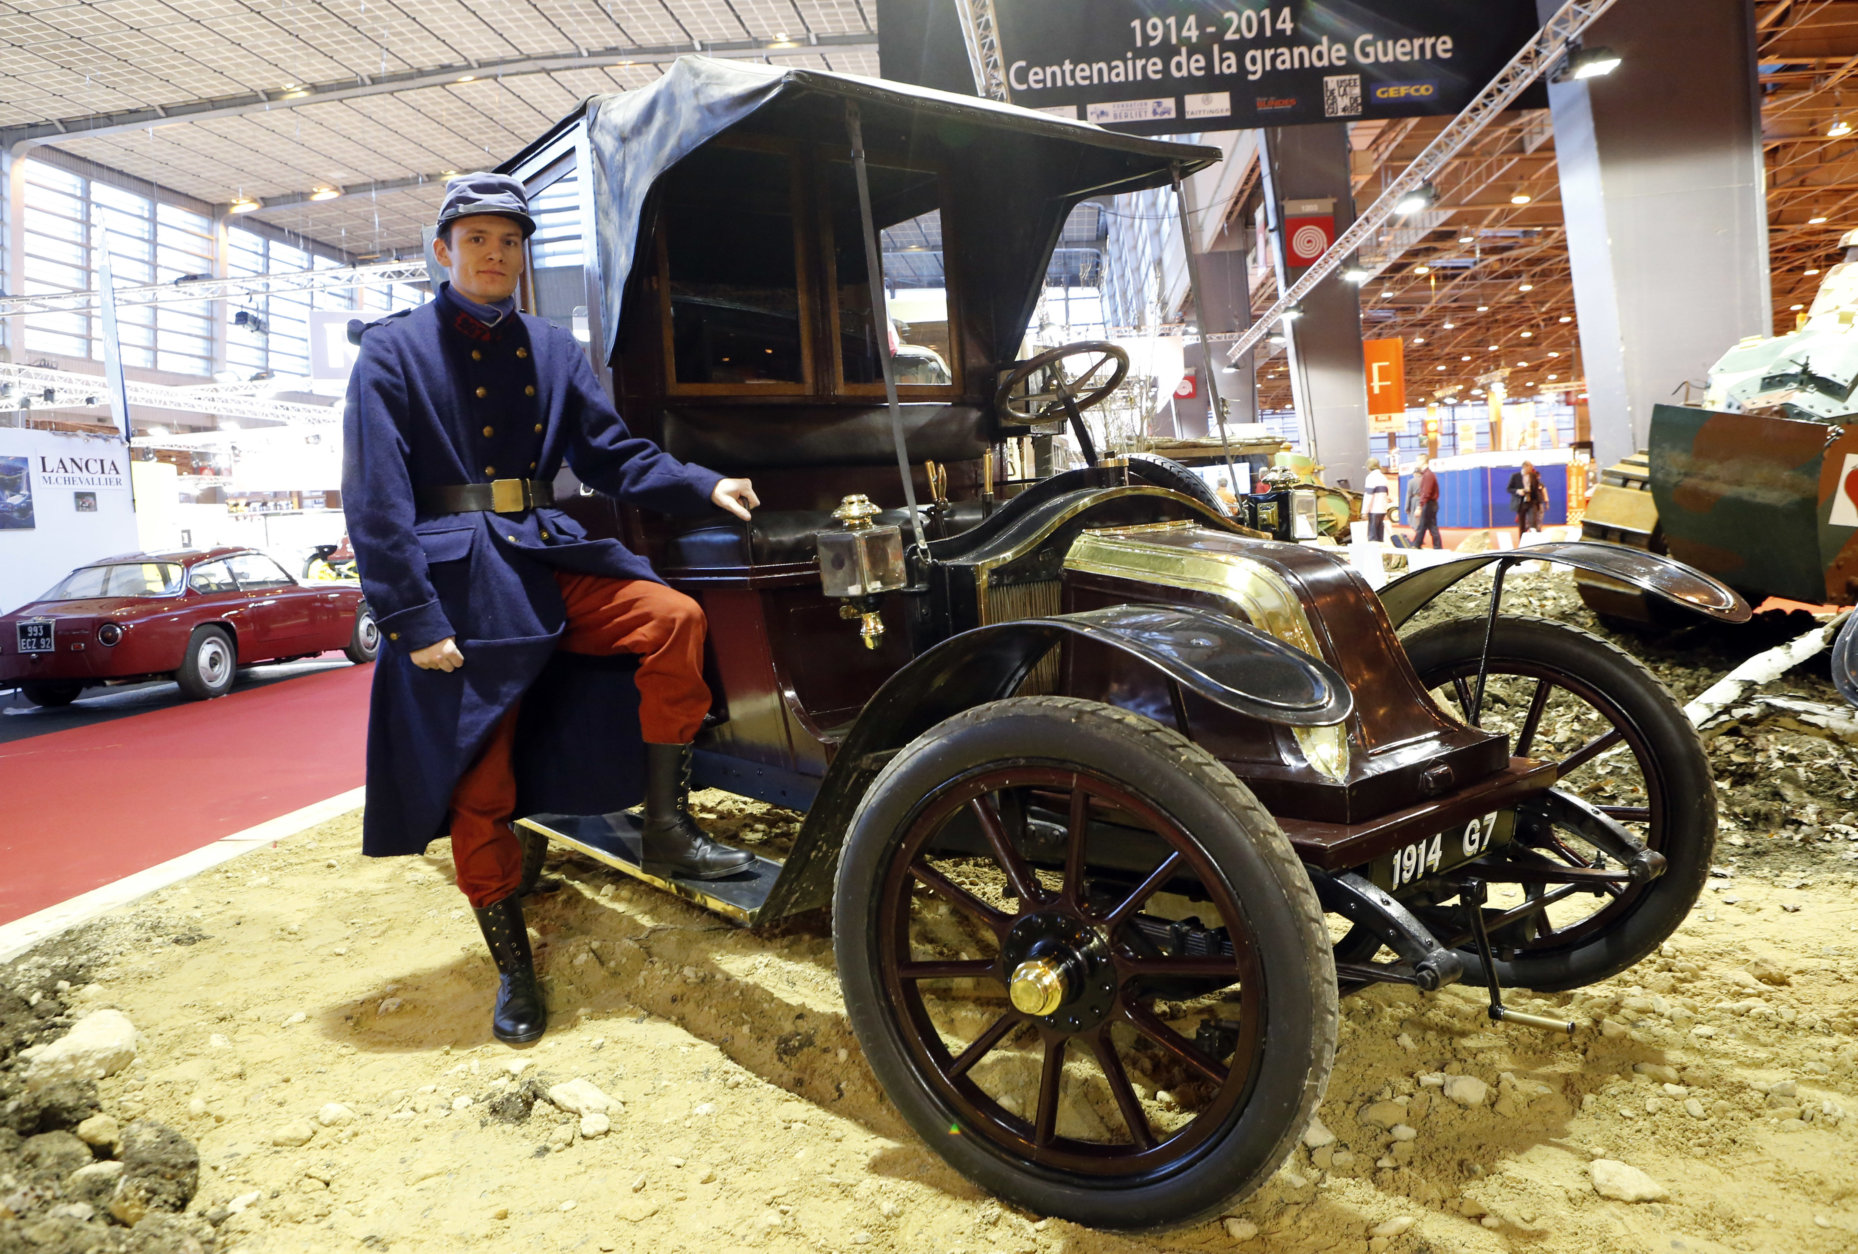 An actor dressed like a WWI soldier poses in front of a 1914 Renault AG1, known as Taxi de la Marne, during the Retromobile vintage cars exhibition, in Paris, Wednesday, Feb. 5, 2014. The exhibition runs until Friday Feb. 7, 2014. The name Taxi de la Marne was not used until the outbreak of World War I, when the fleet of Paris taxis was requisitioned by the French Army to transport troops from Paris to the First Battle of the Marne in early September 1914. (AP Photo/Jacques Brinon)